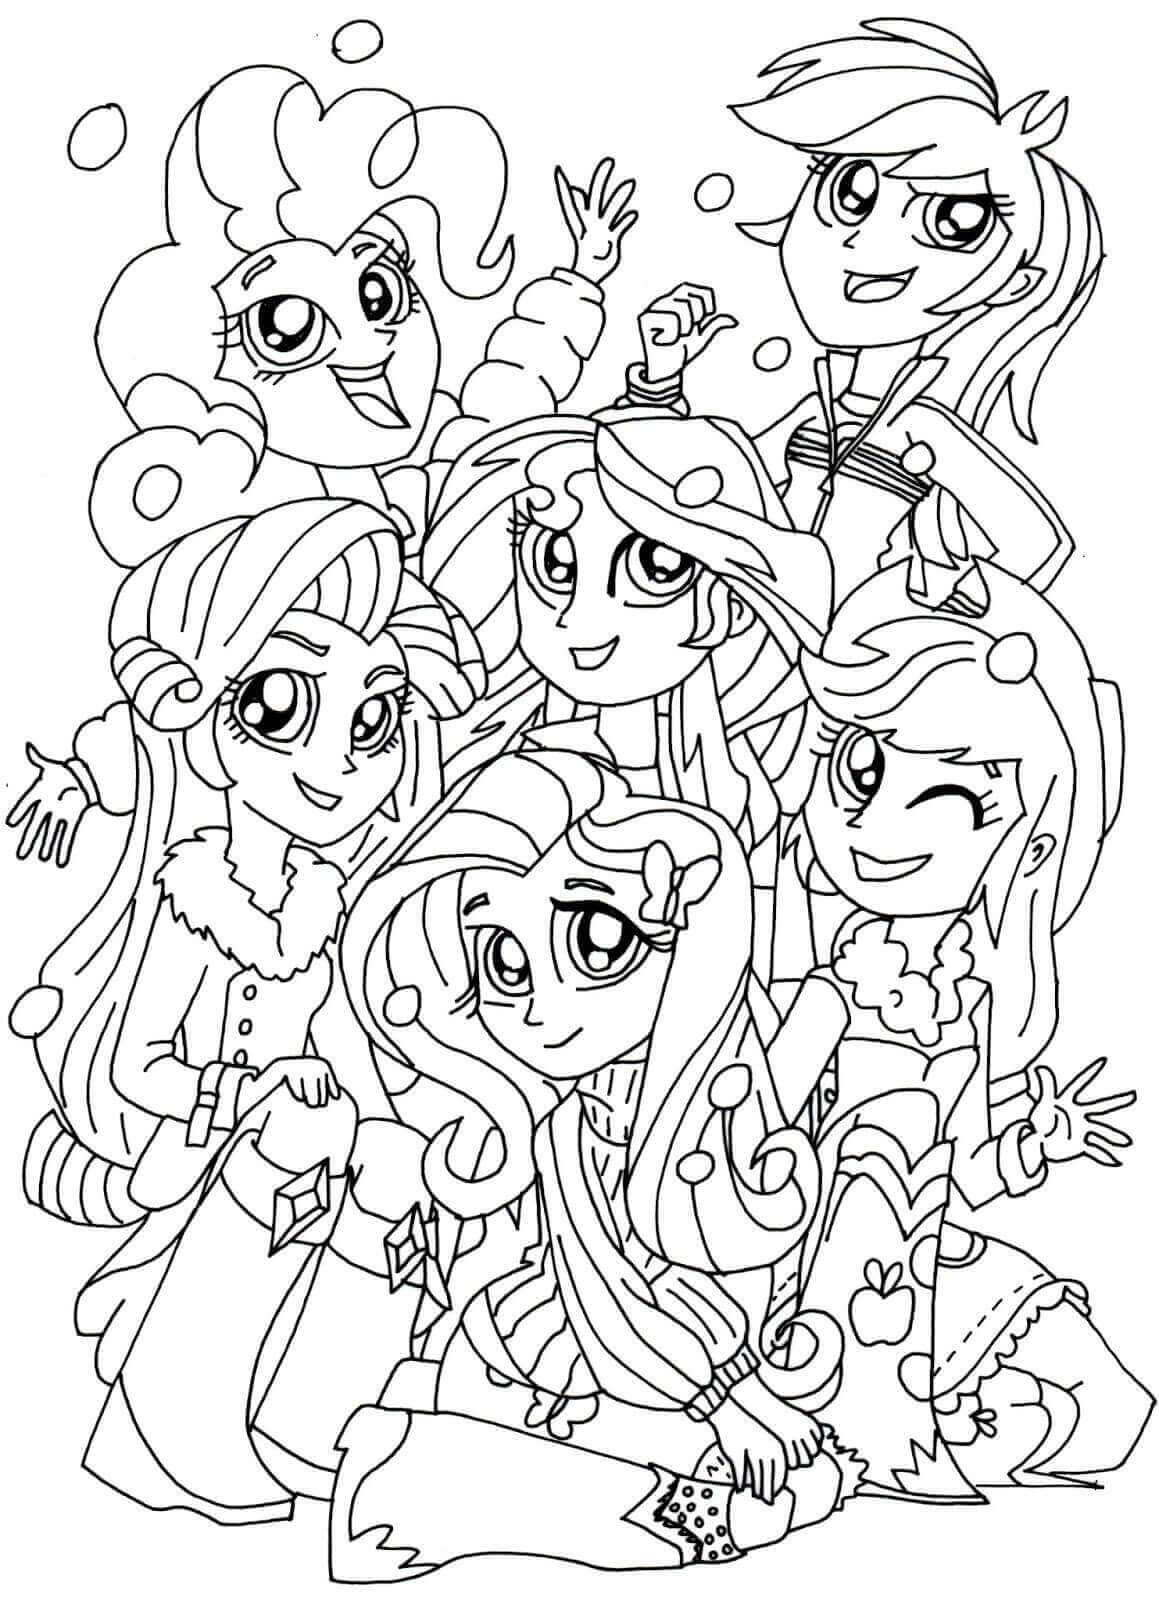 Coloring Pages For Girls Detailed
 15 Printable My Little Pony Equestria Girls Coloring Pages